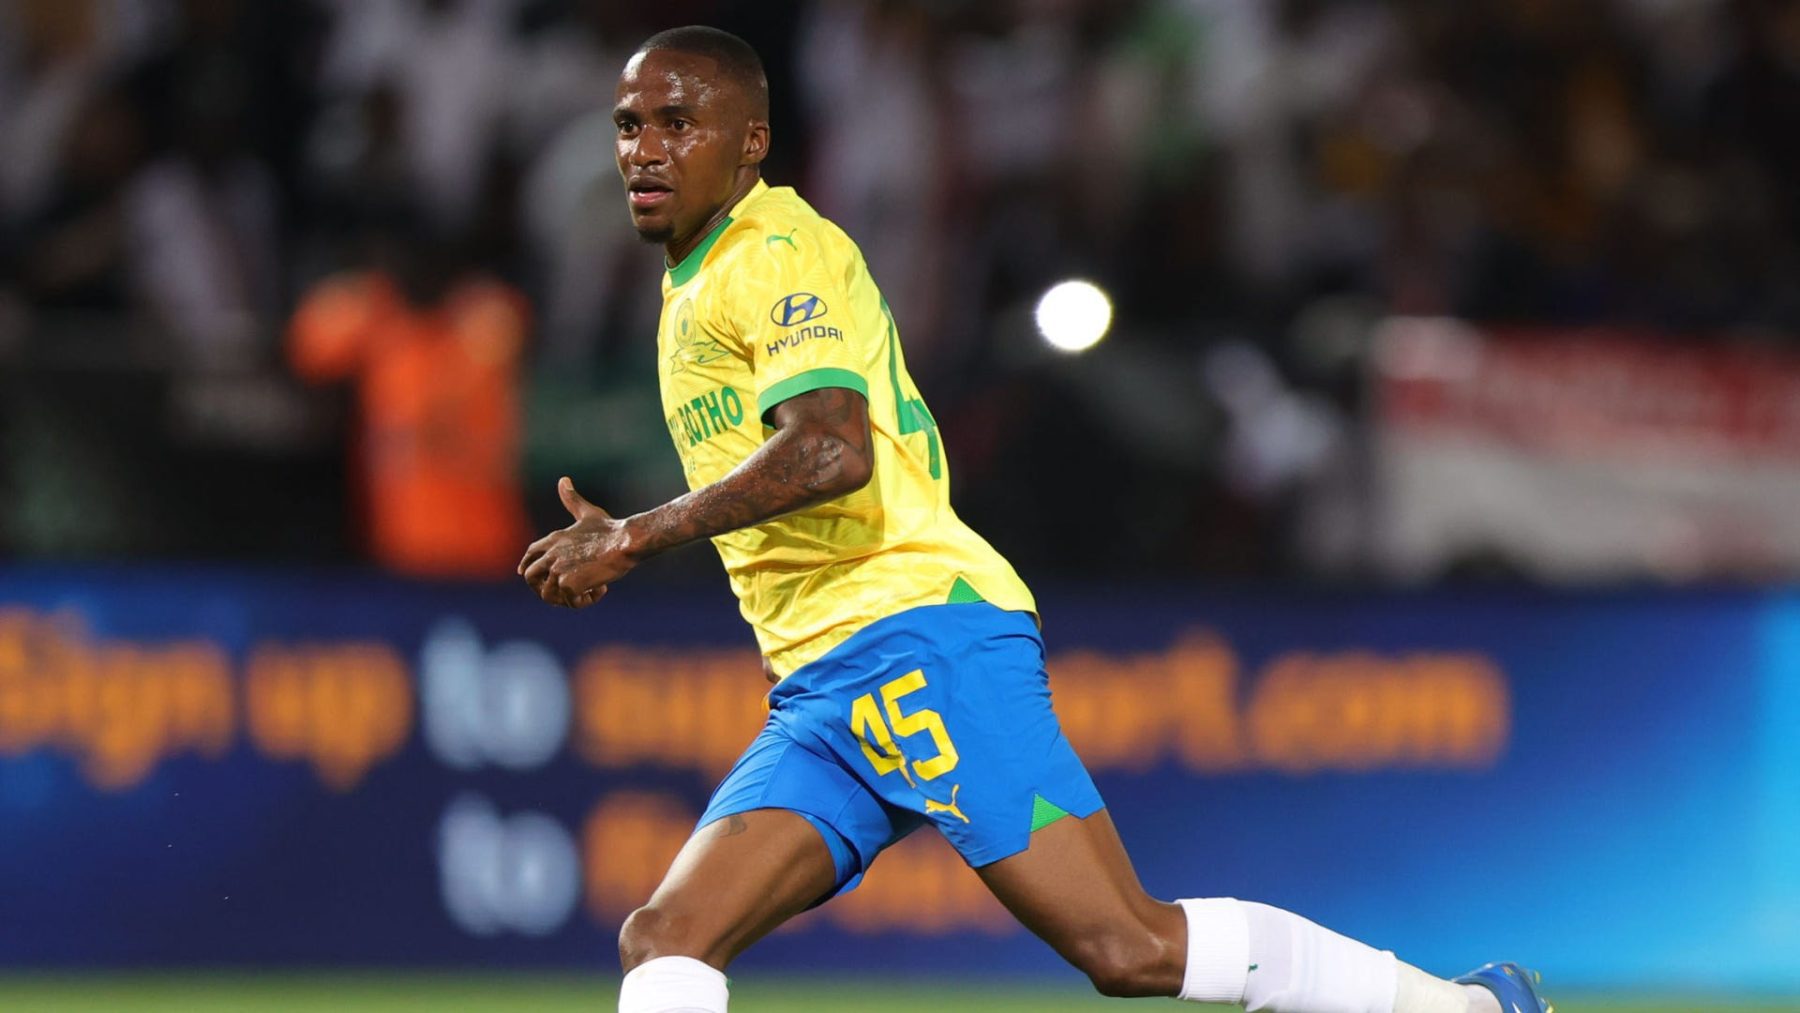 Why Lorch is eligible for Sundowns’ Champions League matches